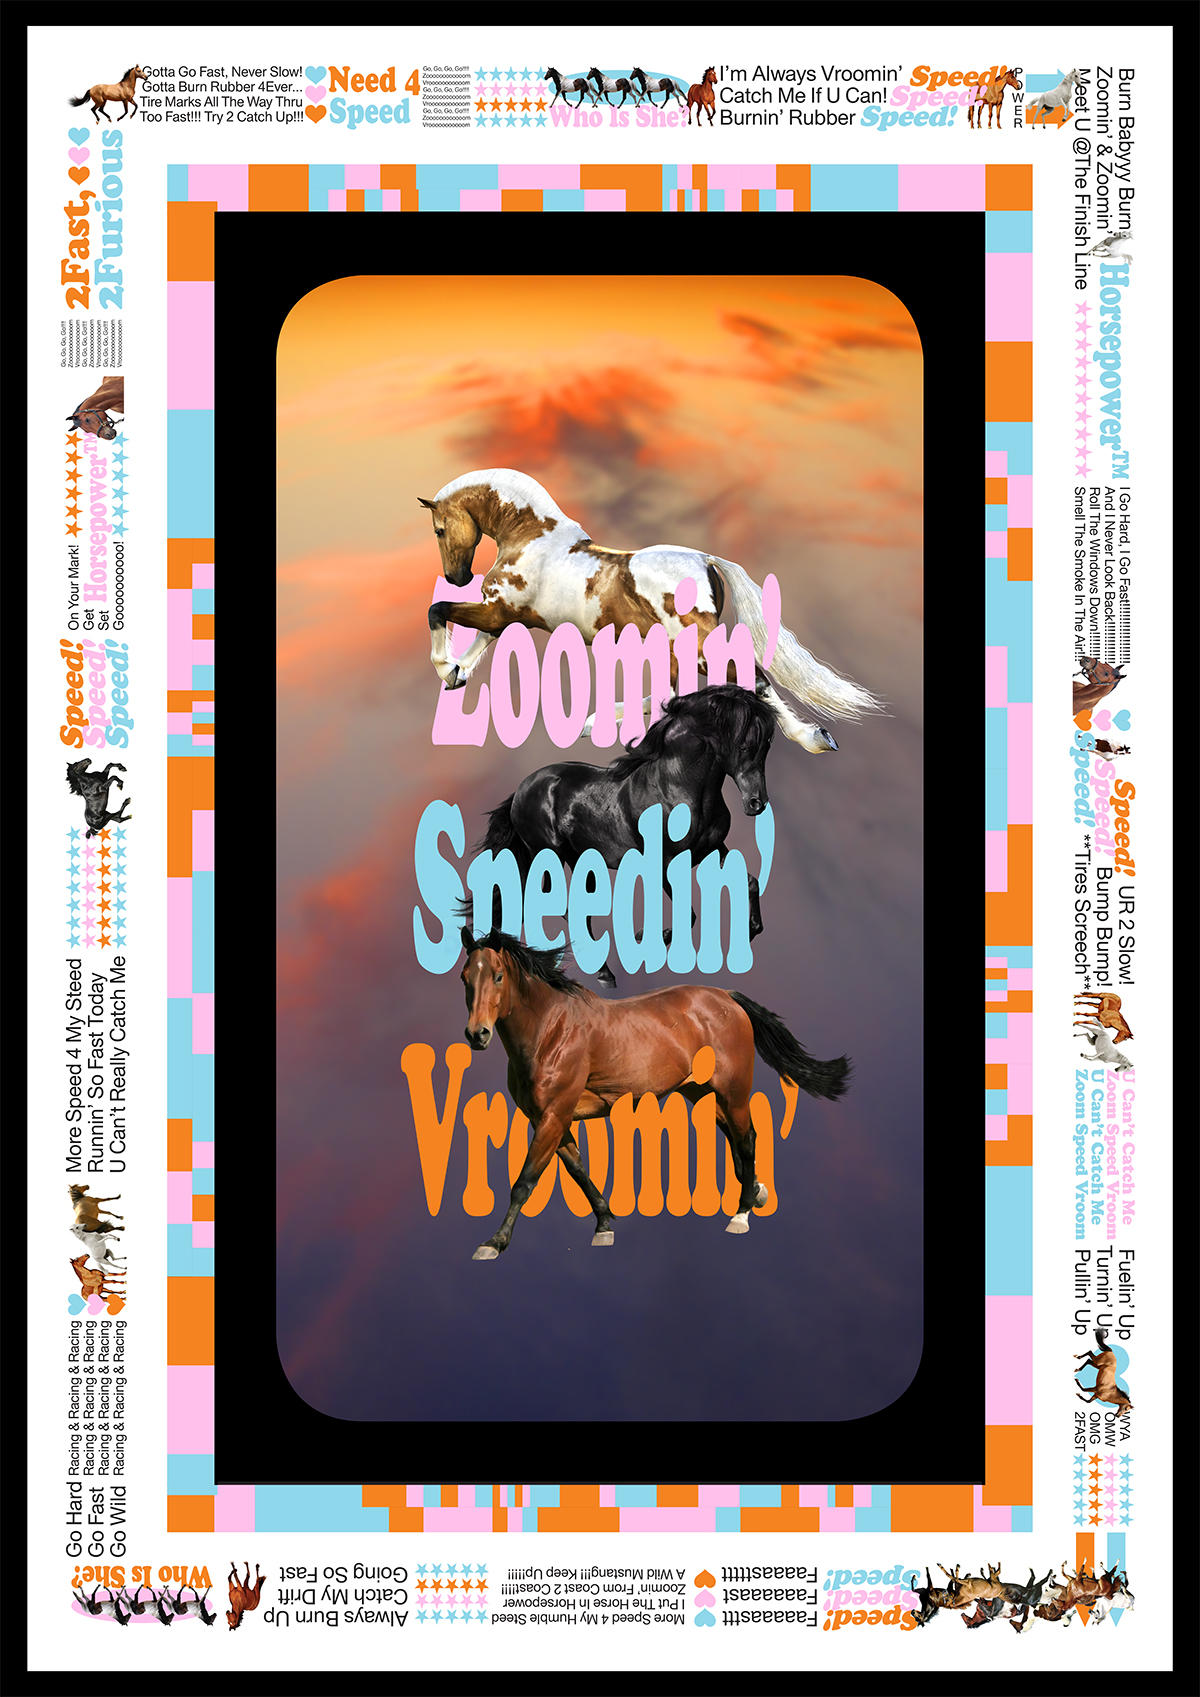 Poster design with the text 'Zoomin’ Speedin’ Vroomin’'